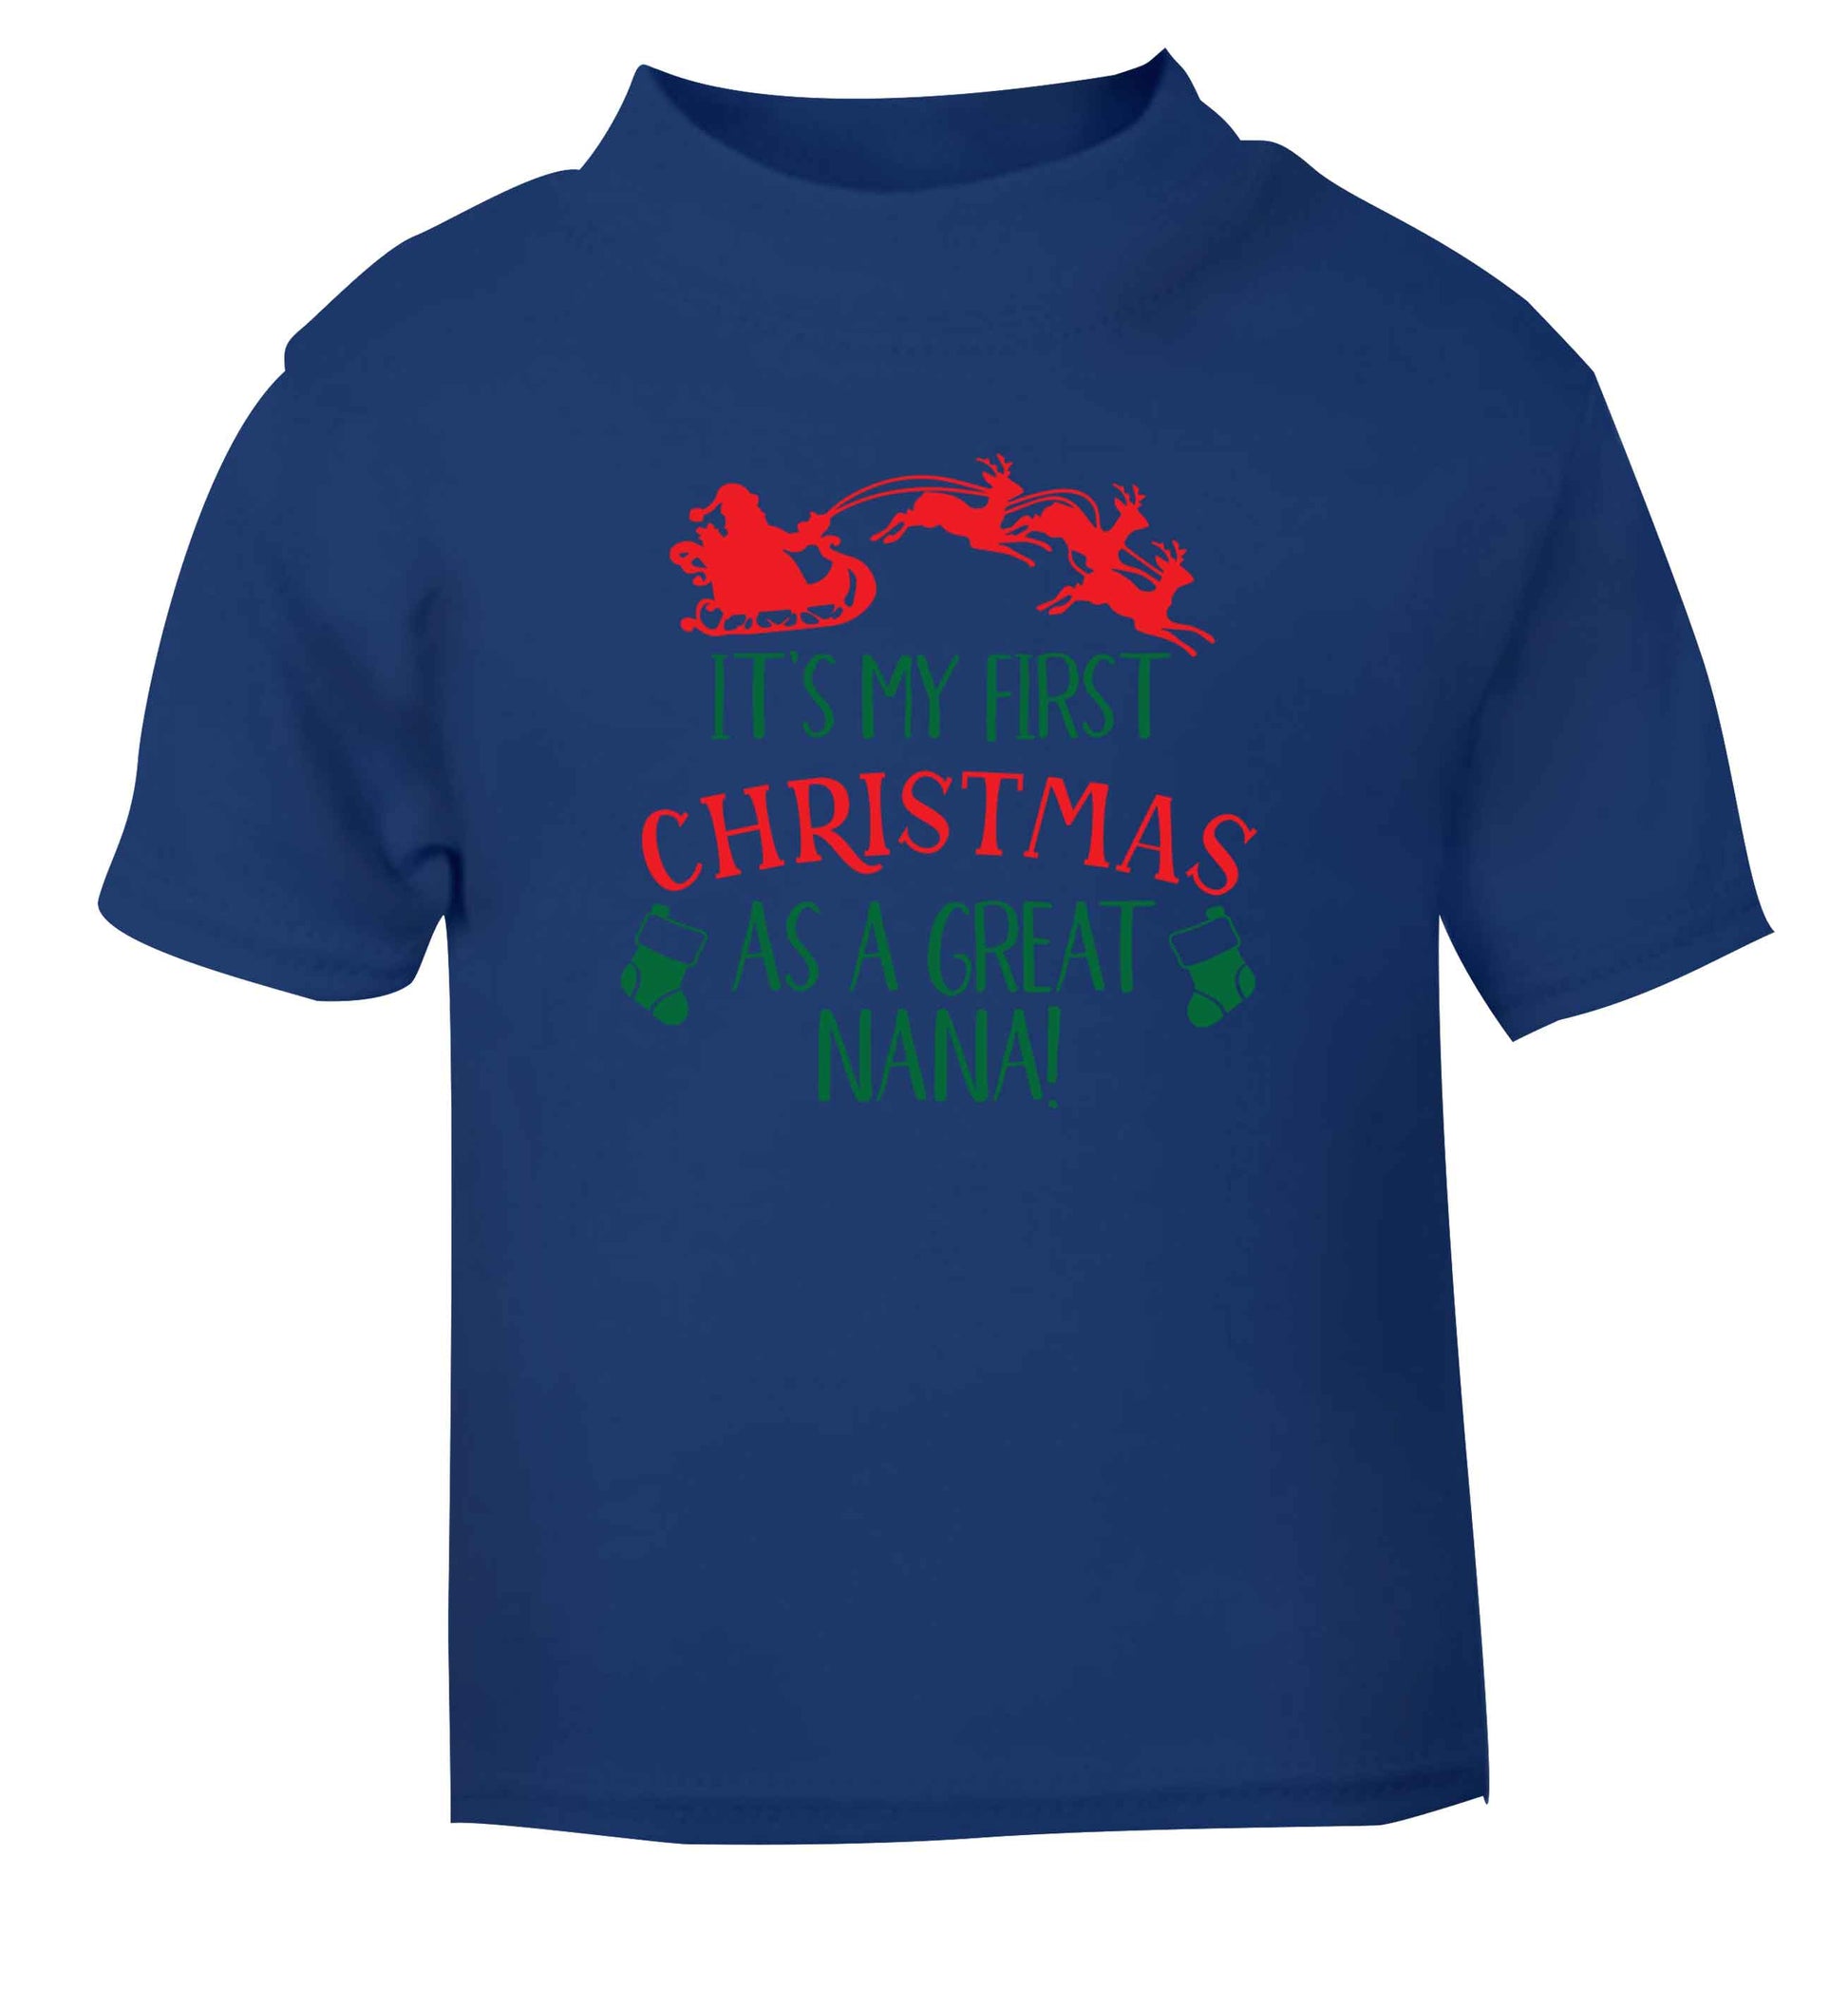 It's my first Christmas as a great nana! blue Baby Toddler Tshirt 2 Years